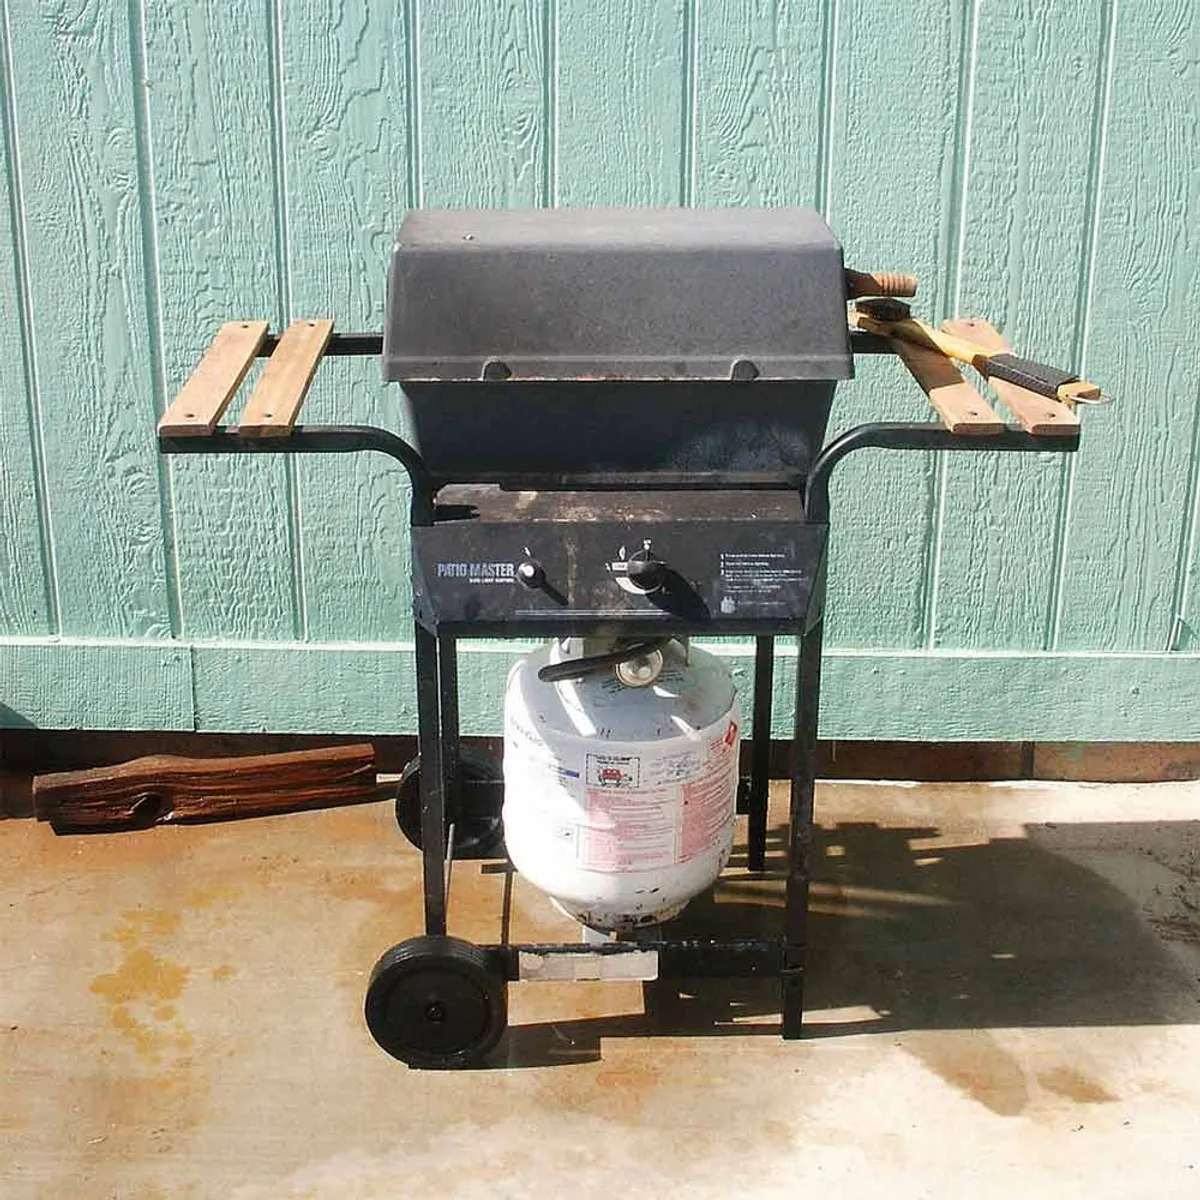 A typical propane grill using a fuel tank as storage for the fuel